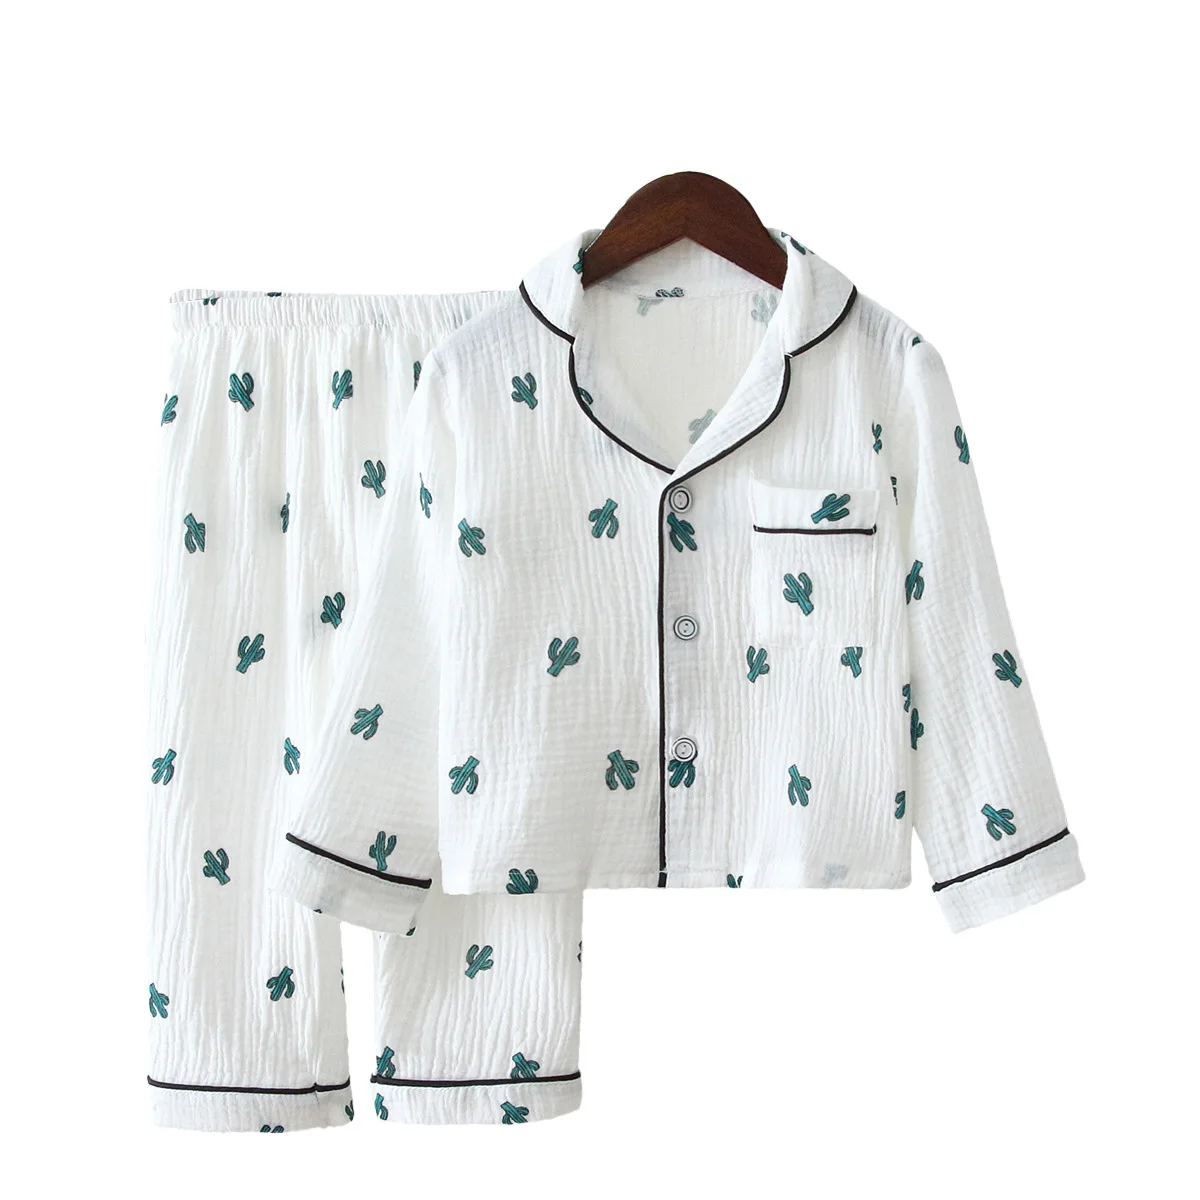 Spring and summer children's cotton gauze pajamas Girls Boys Cotton Yarn children's thin long sleeve short sleeve home clothes christmas pajama sets